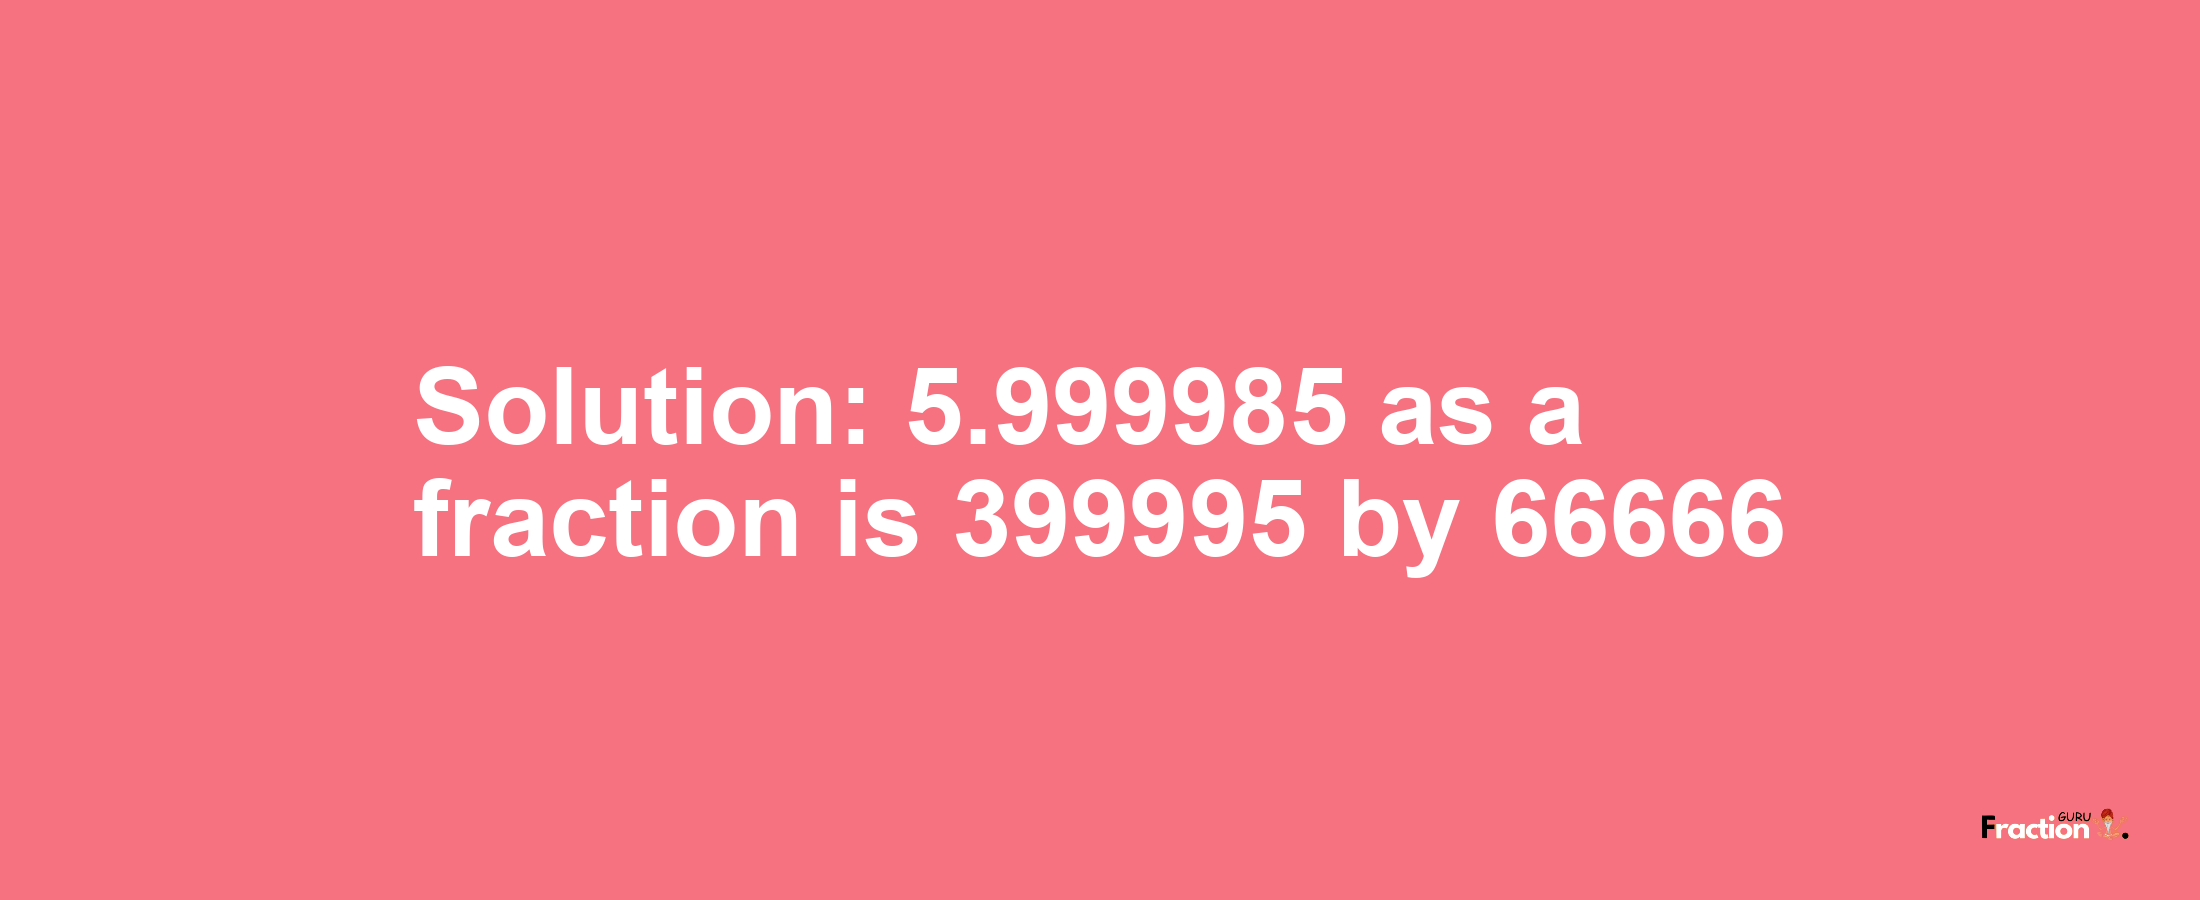 Solution:5.999985 as a fraction is 399995/66666